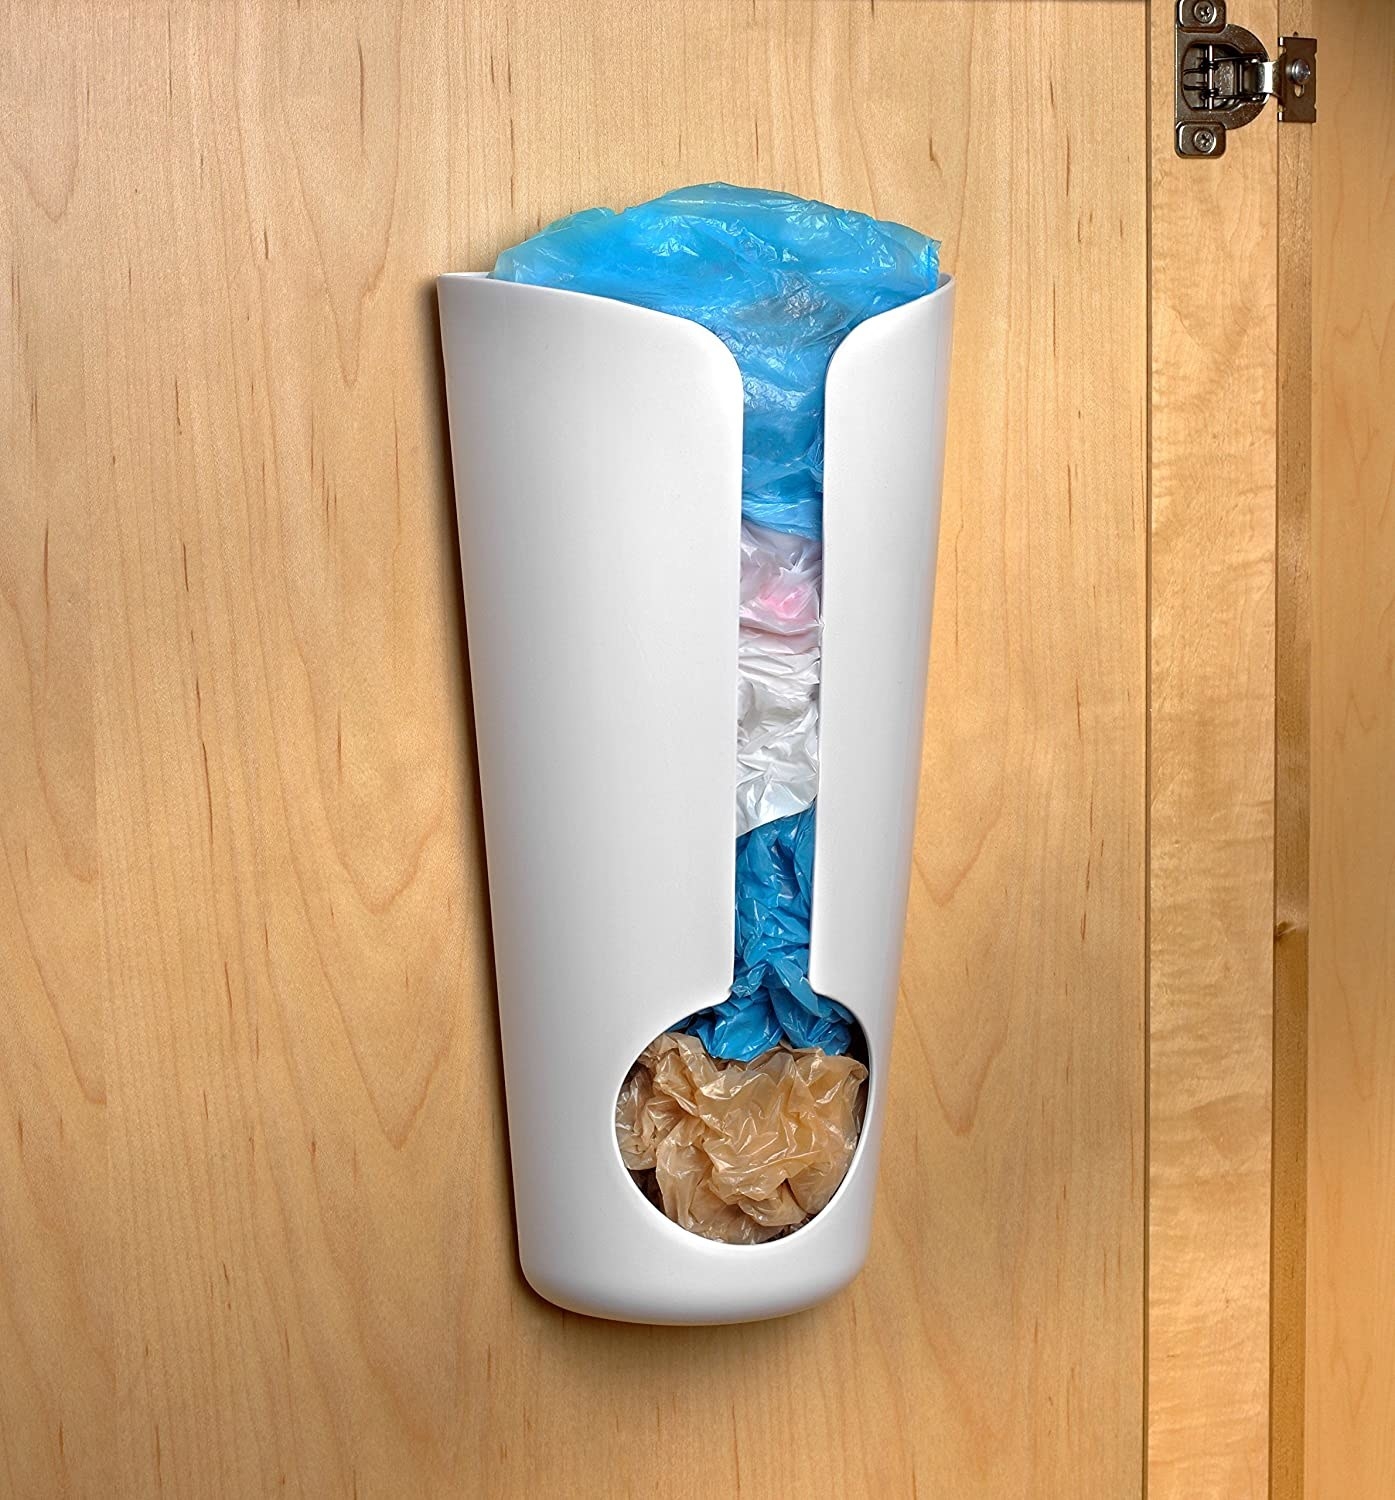 The plastic bag holder mounted on the inside of a kitchen cabinet